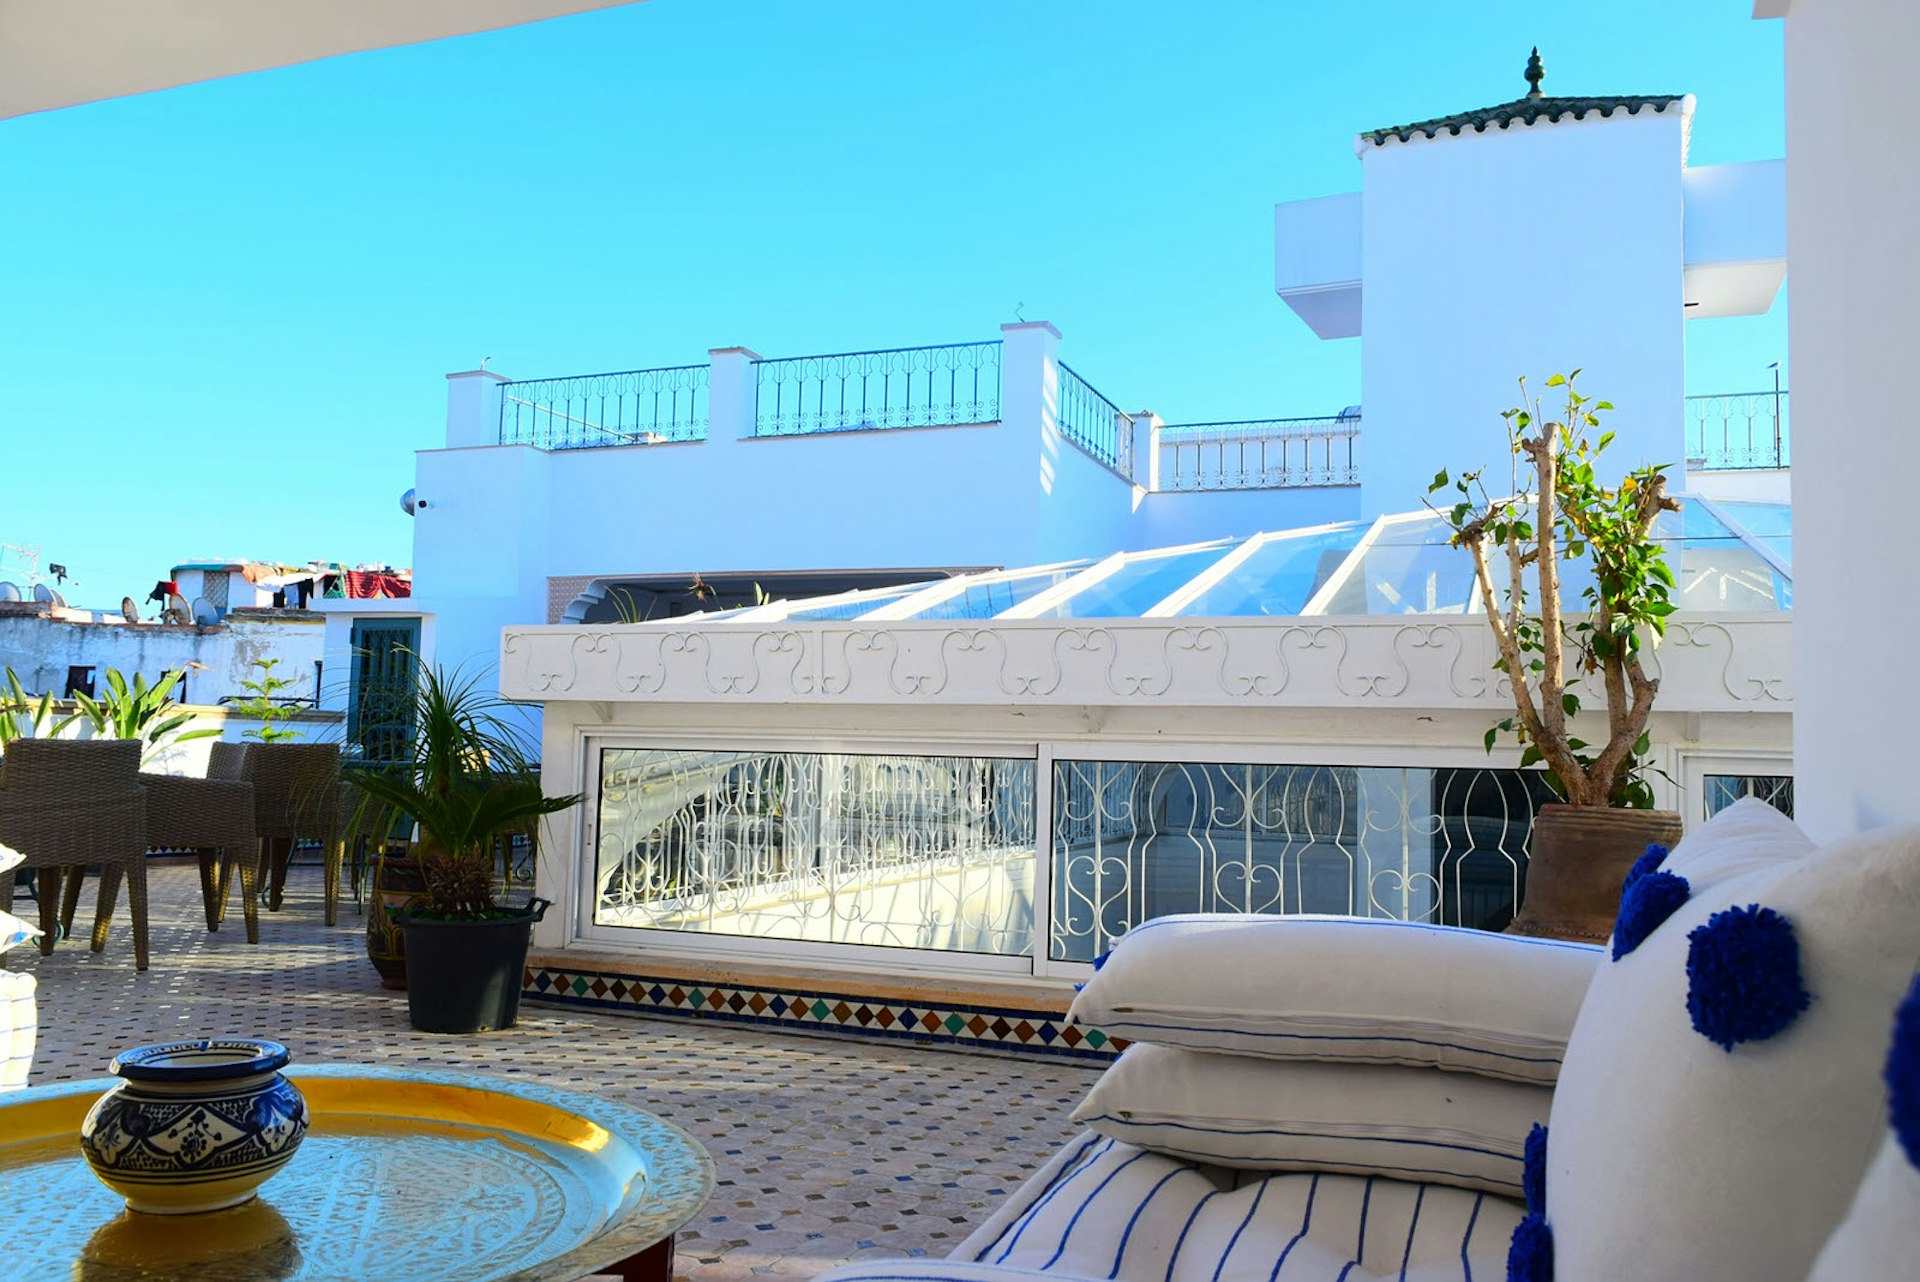 Terrace at Palais Zahia, Tangier, Morocco. Image by Jessica Cherkaoui / Lonely Planet